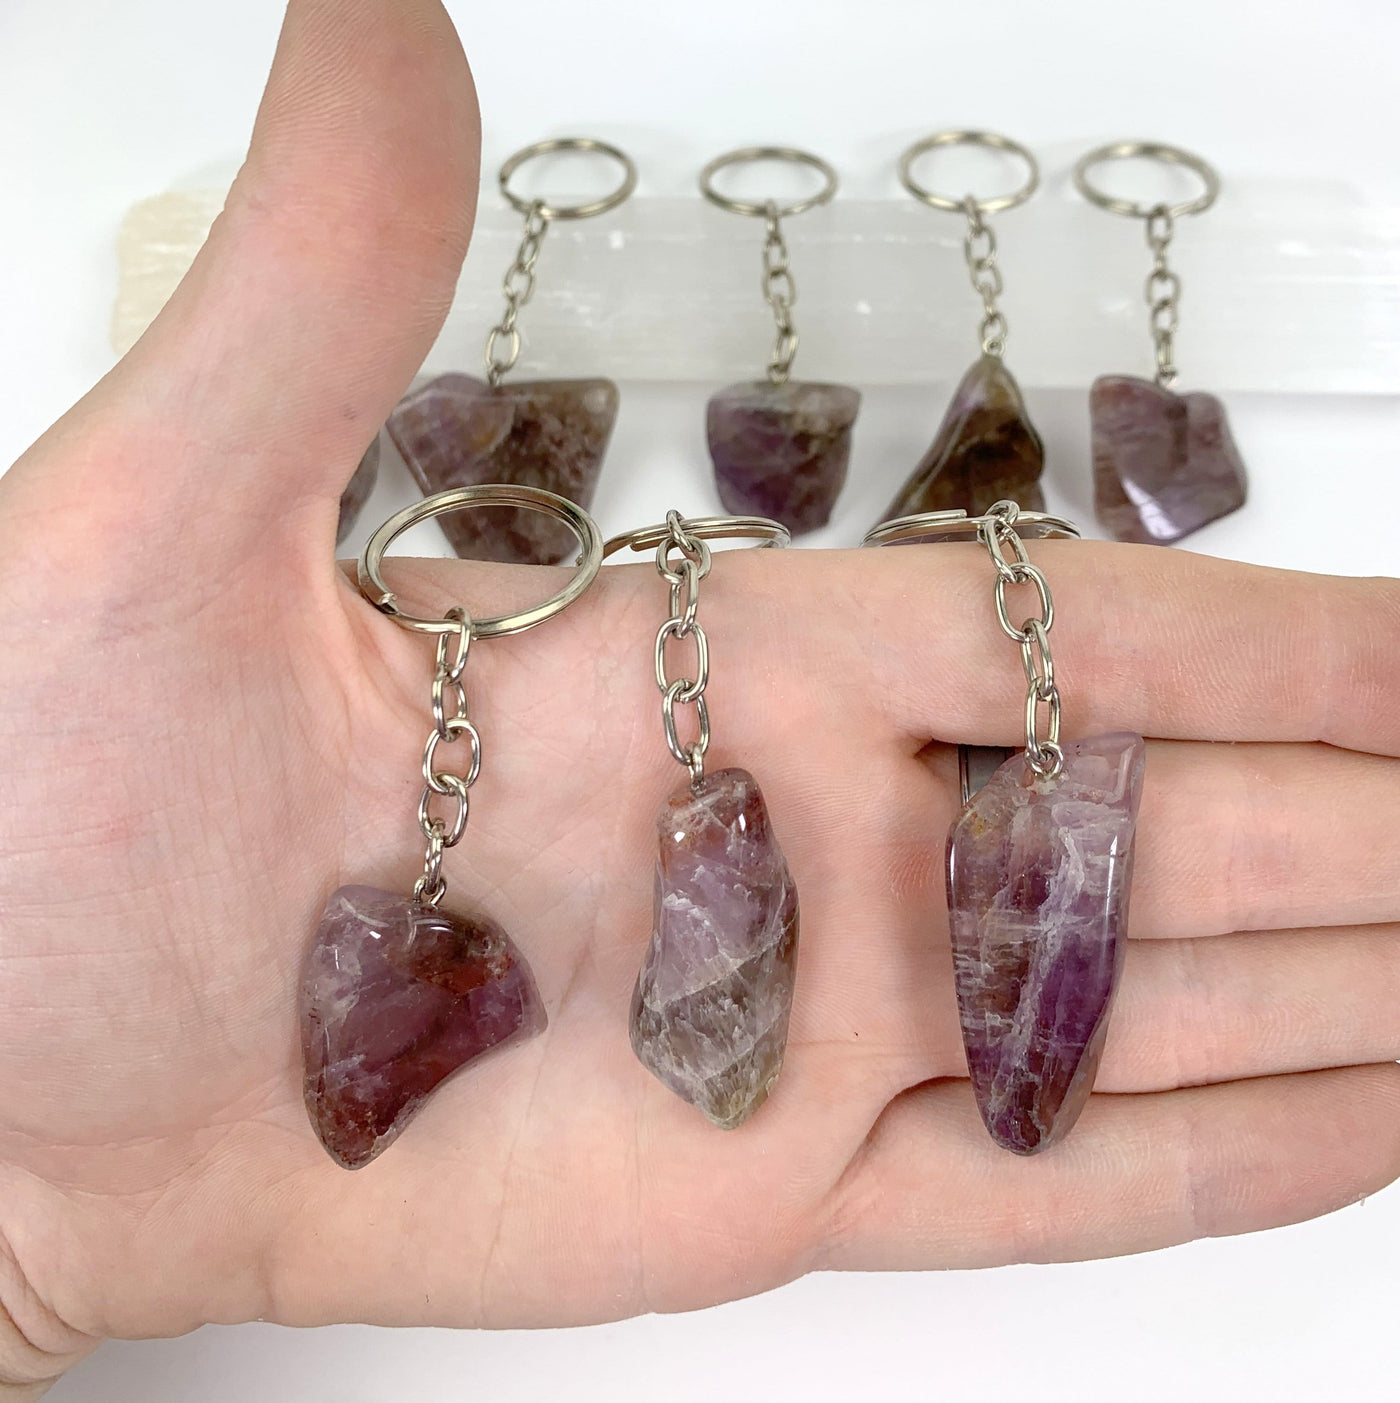 three seven mineral amethyst slab keychains in hand for size reference with others in background